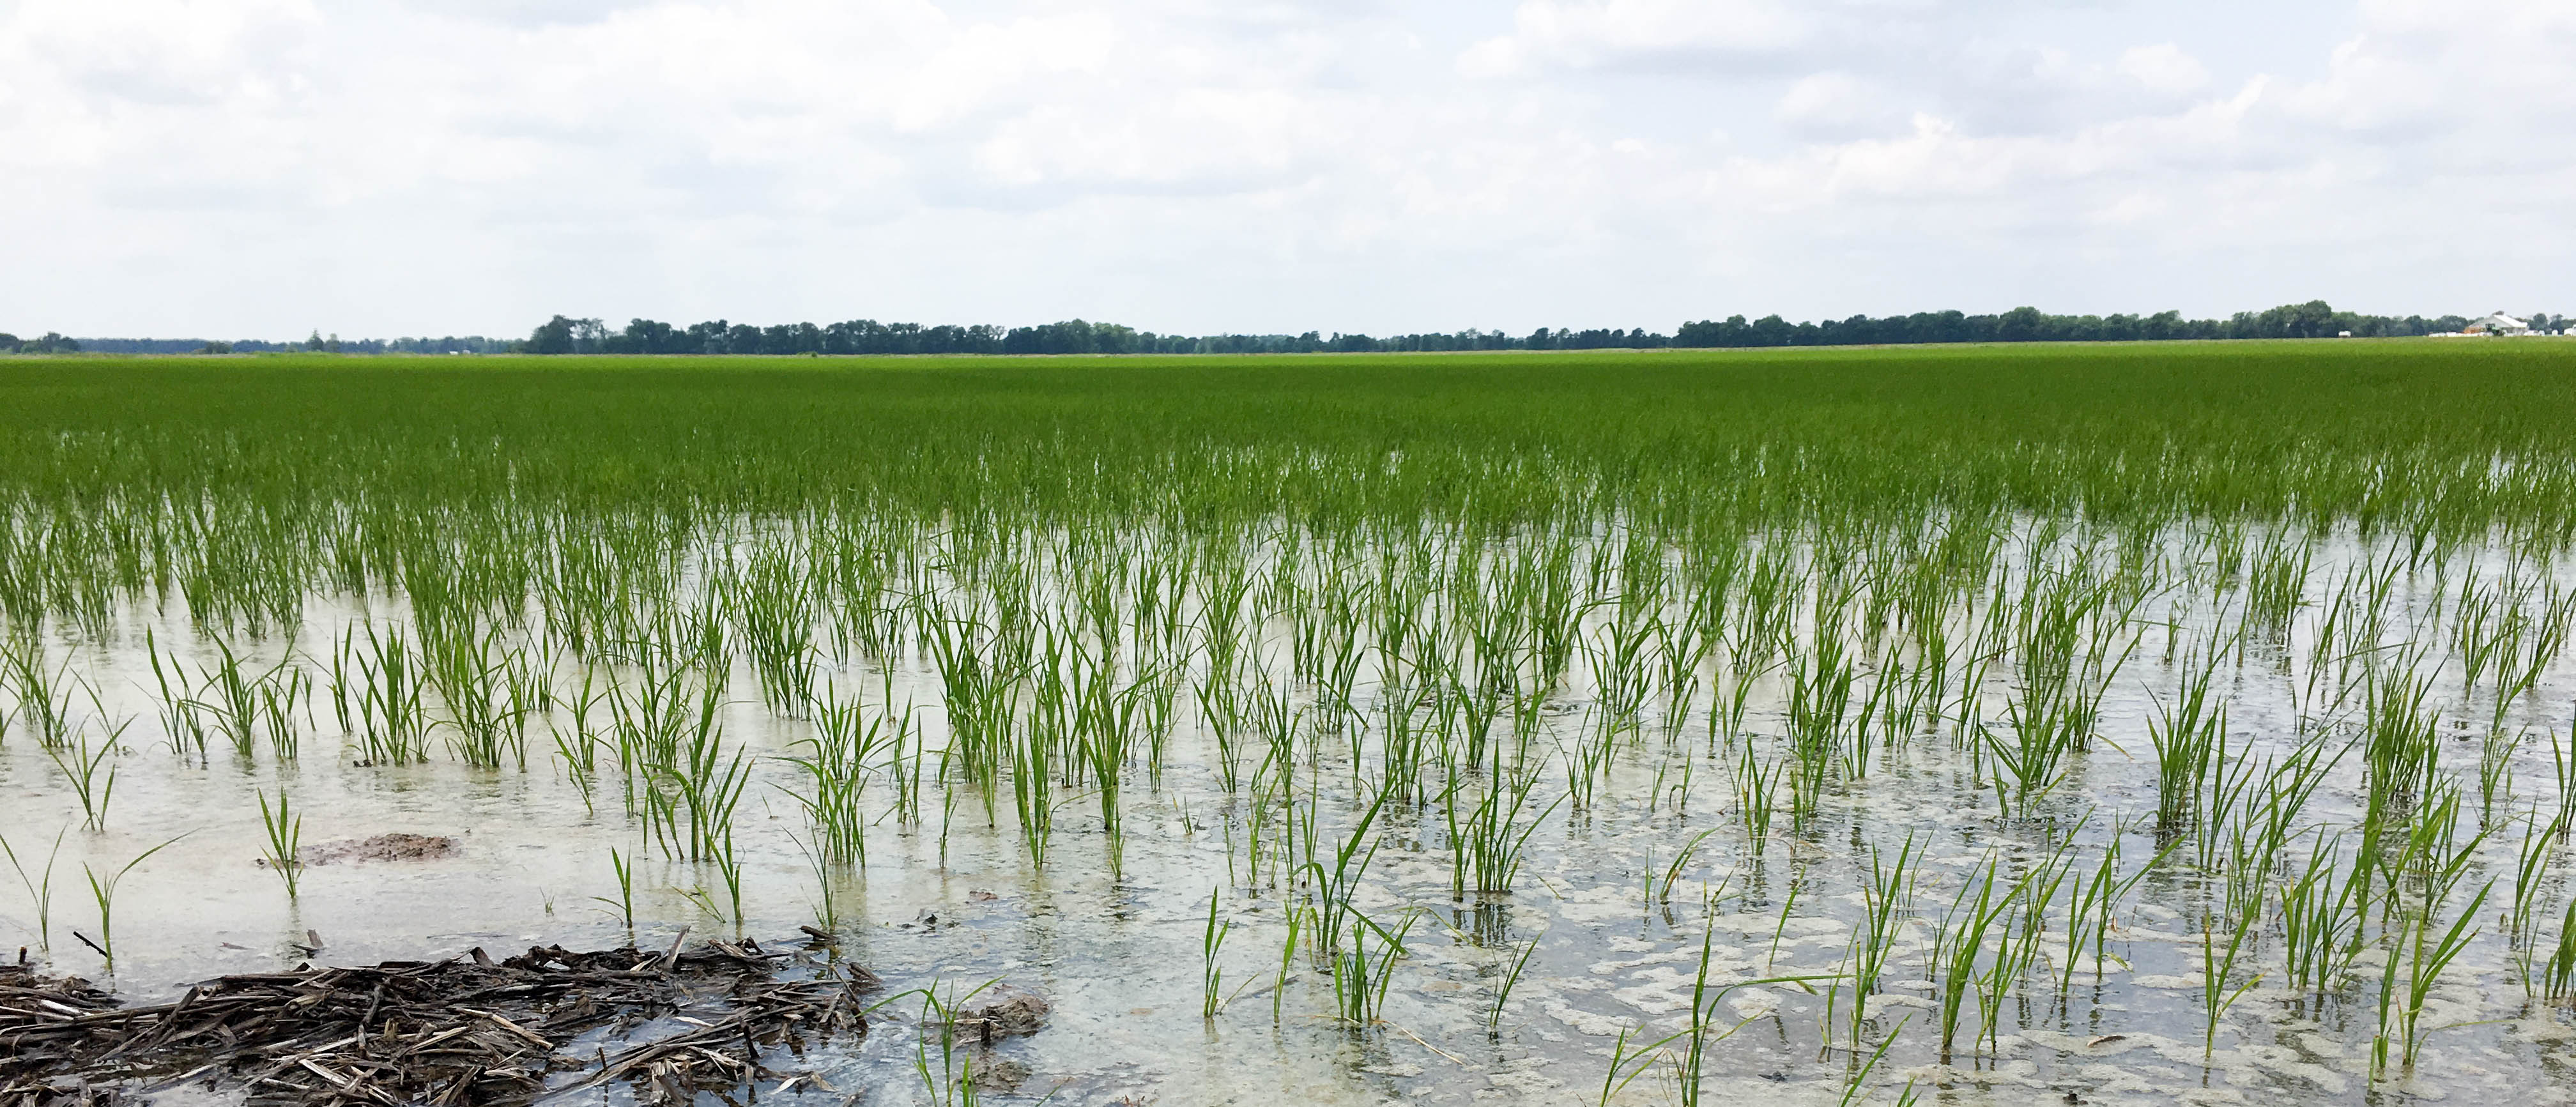 From Riceland Farms: Flooding Rice Fields | Riceland Foods